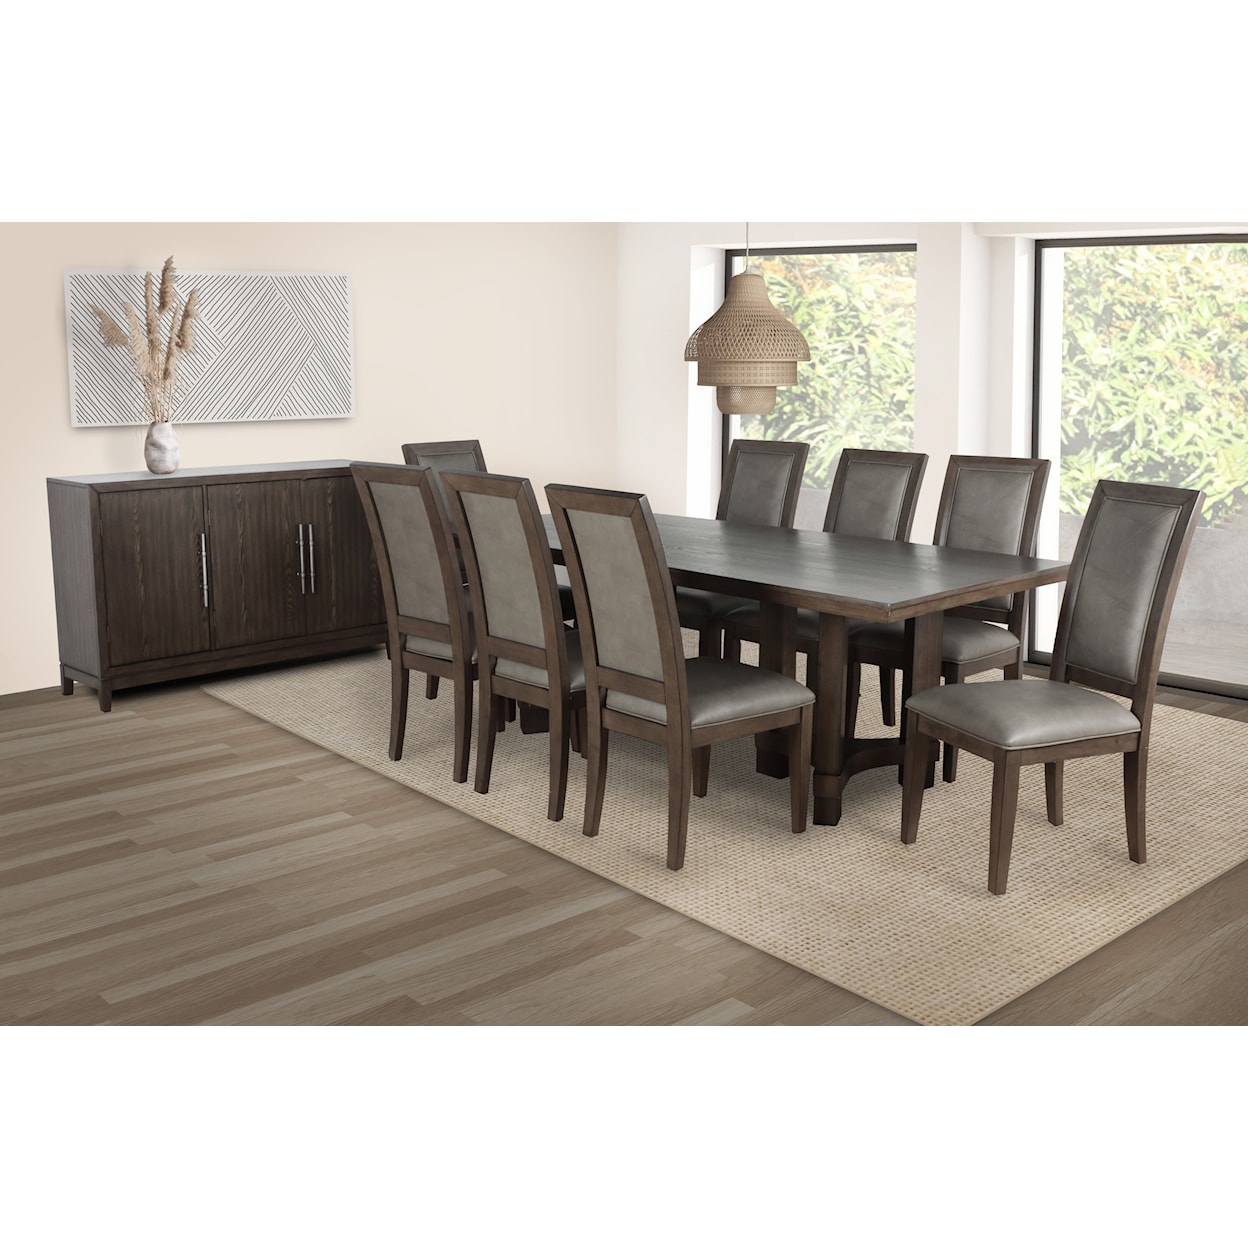 New Classic Furniture Cityscape Dining Room Group